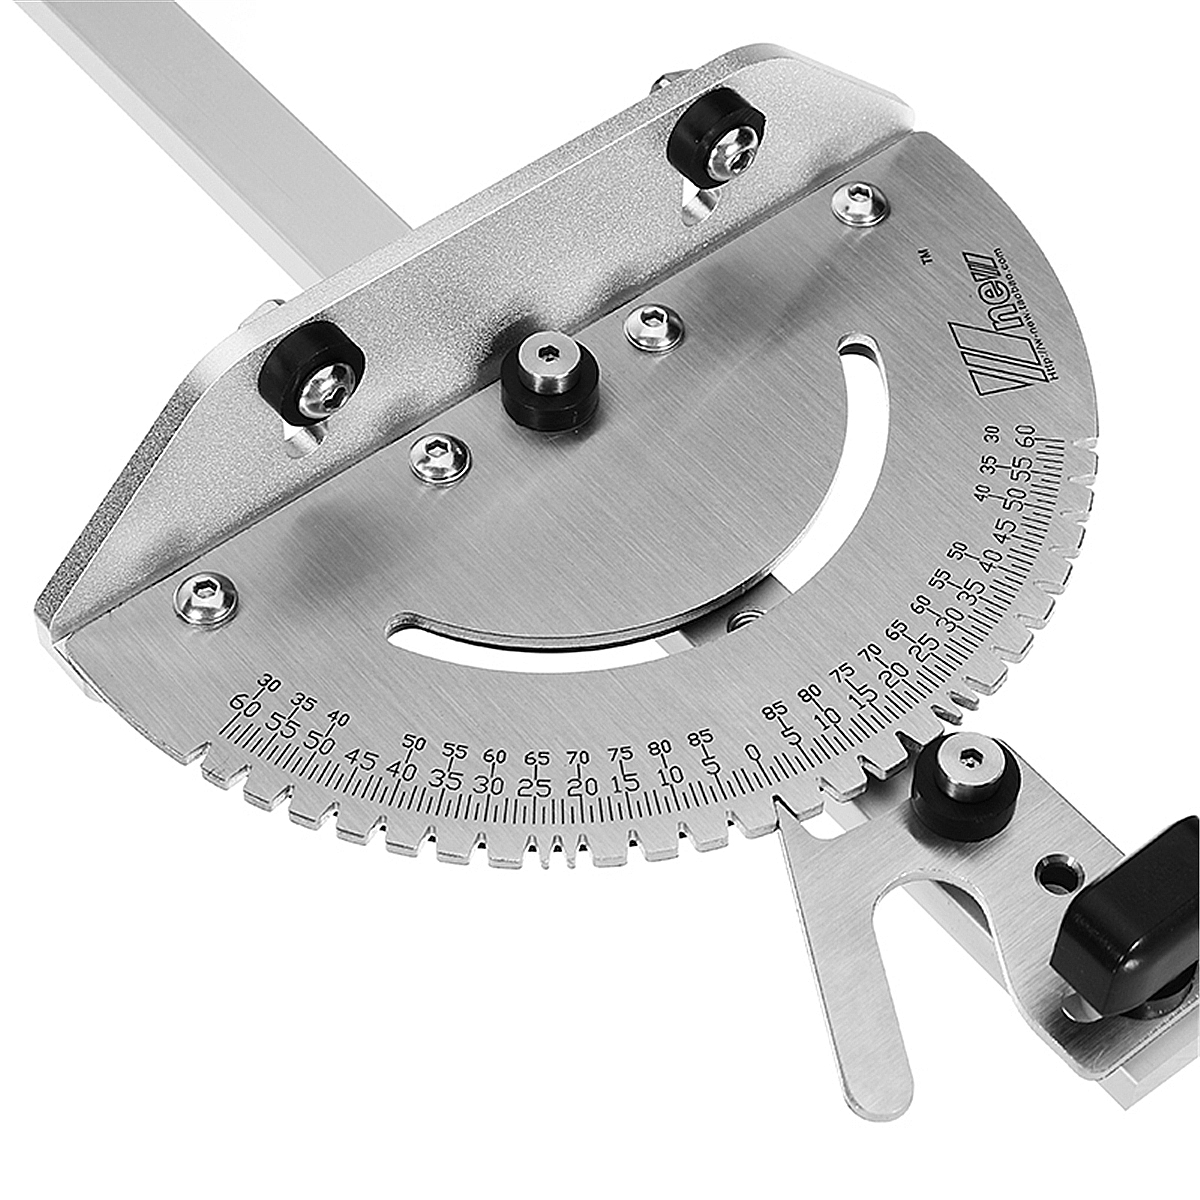 Drillpro-0-90-Degree-450mm-Angle-Miter-Gauge-Sawing-Assembly-Ruler-Woodworking-Tool-for-Table-Saw-Ro-1220860-7